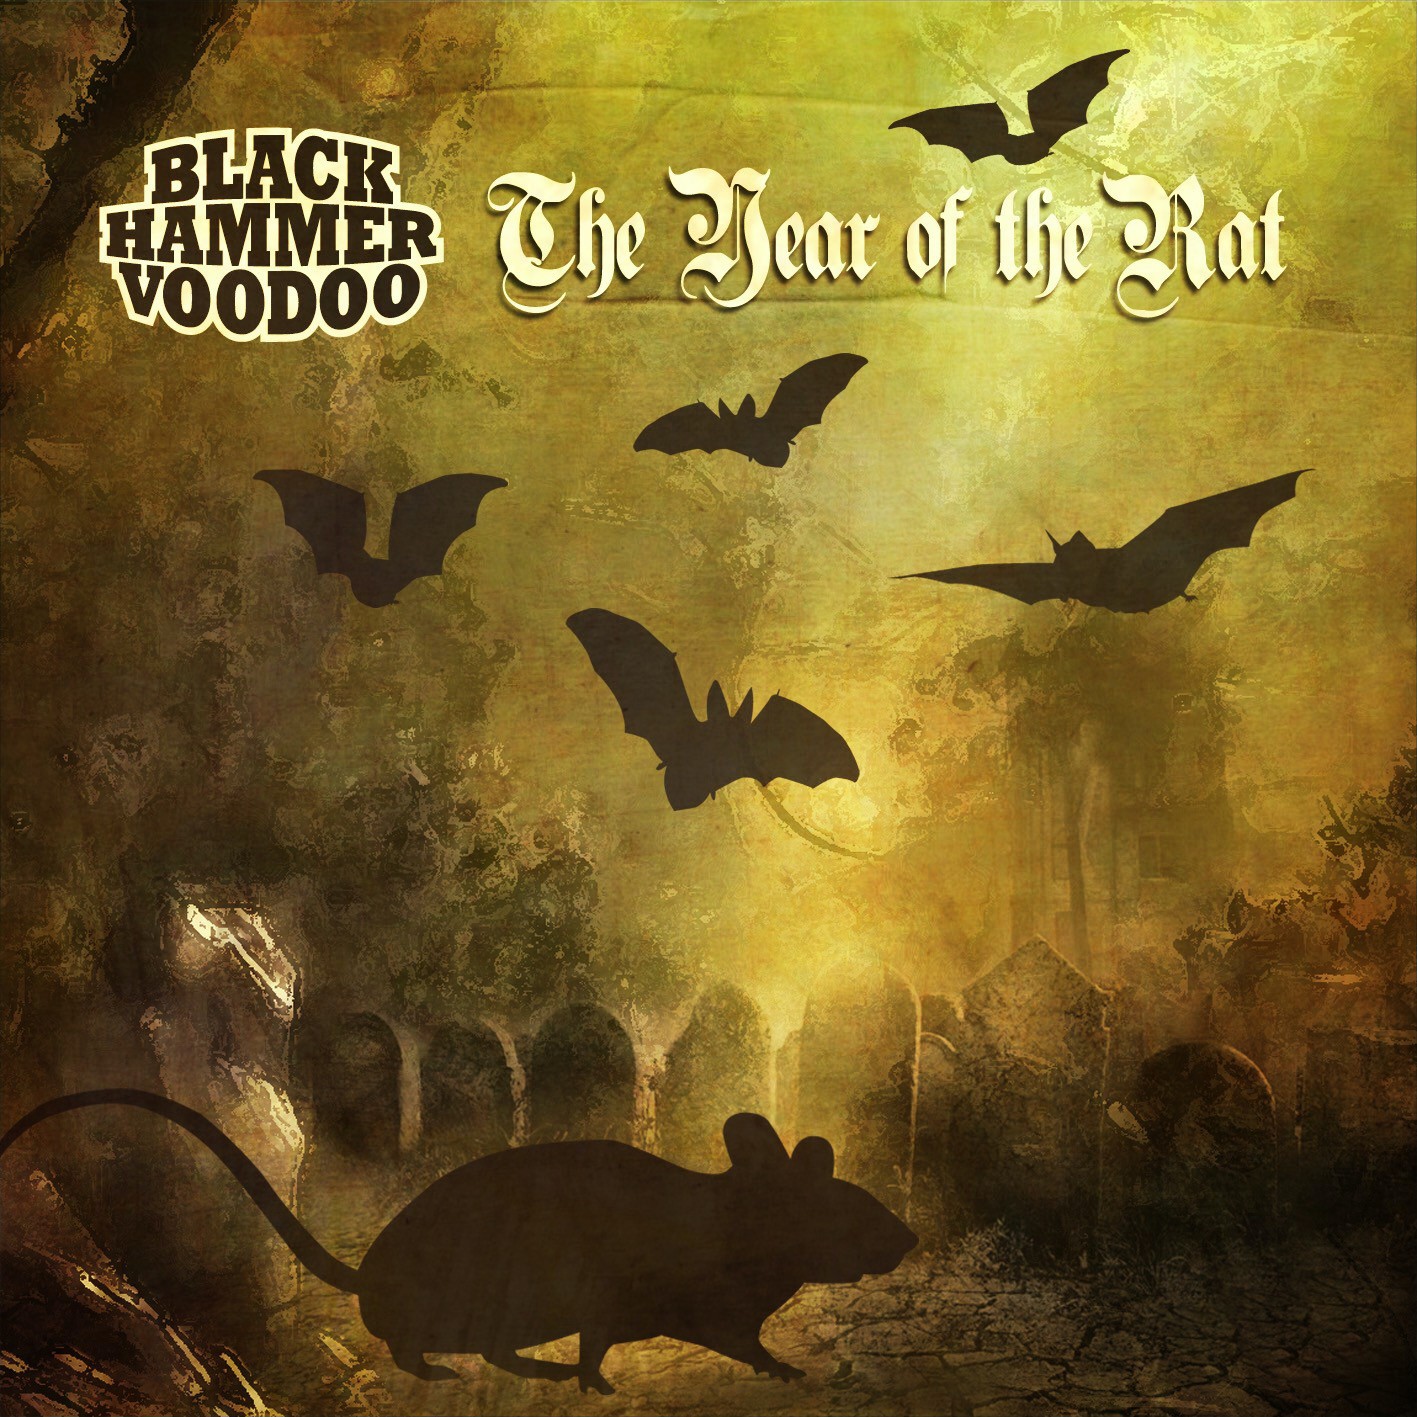 Black Hammer Voodoo - The Year Of The Rat